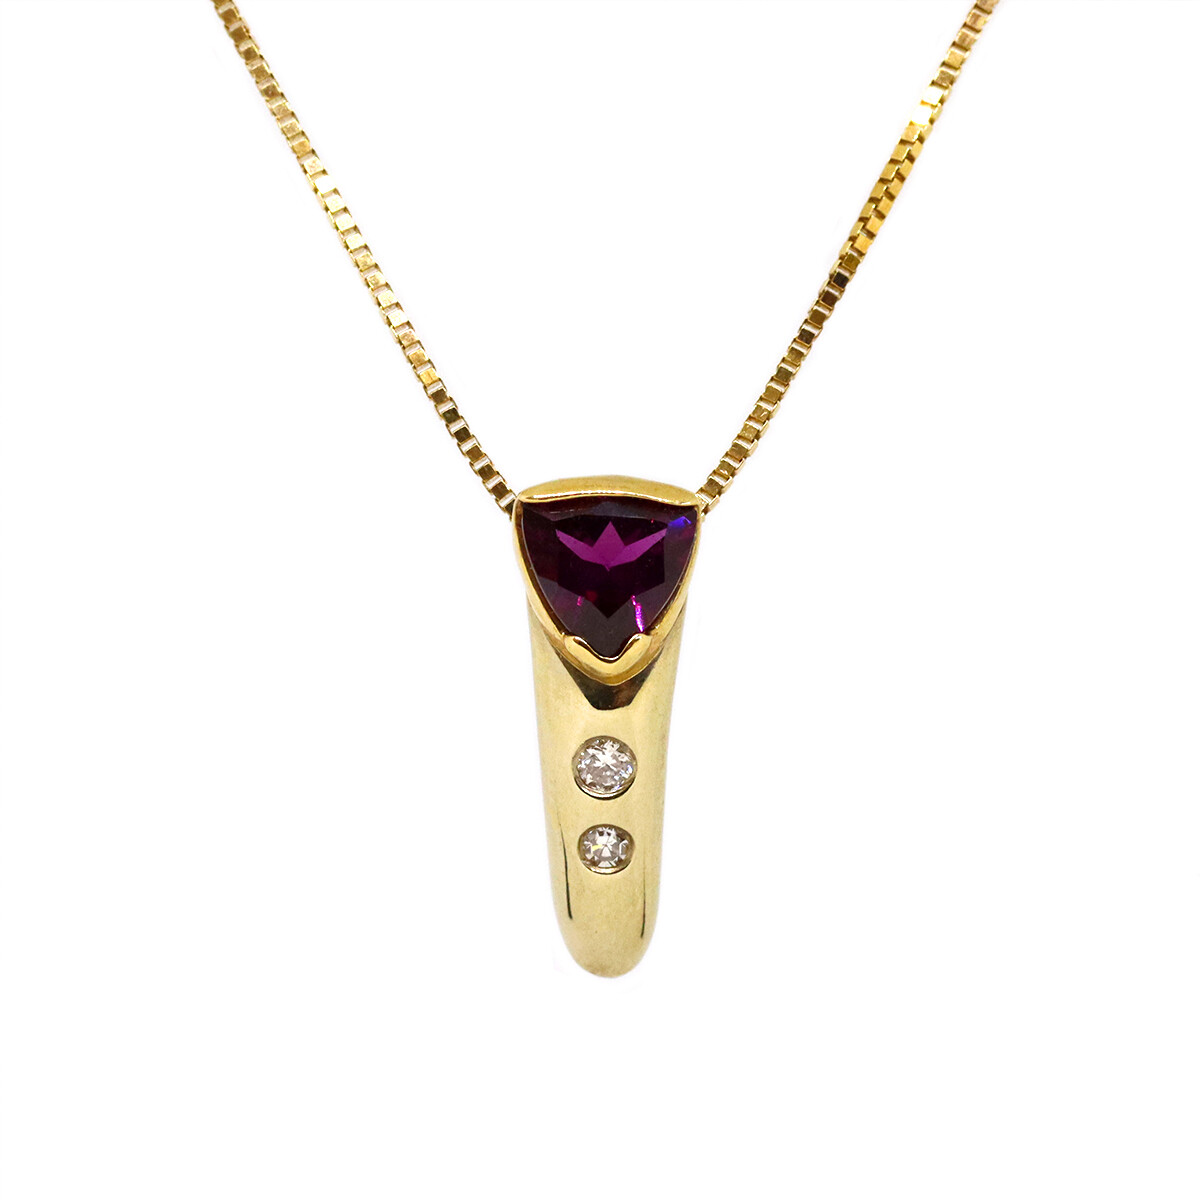 Free Set Trillion Necklace - Element 79 Contemporary Jewelry